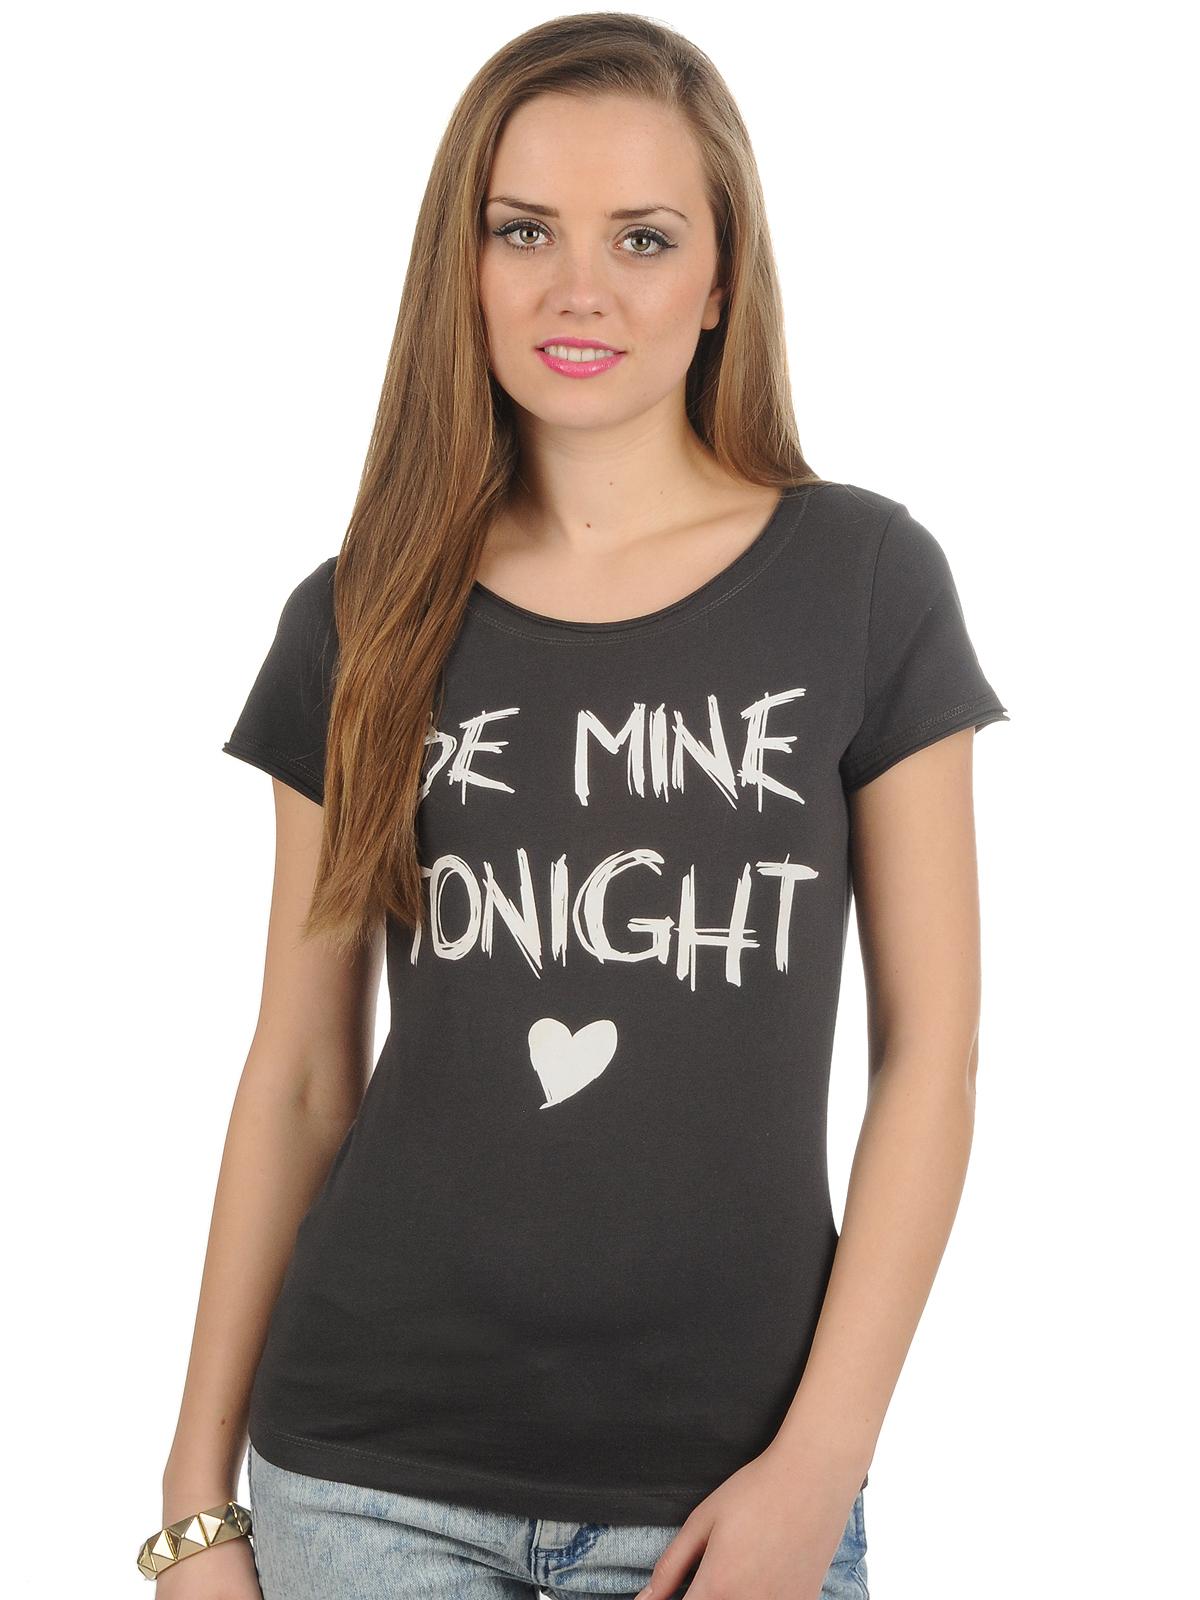 Foto Only Lovely Valentine Camiseta Box gris oscuro M foto 381565